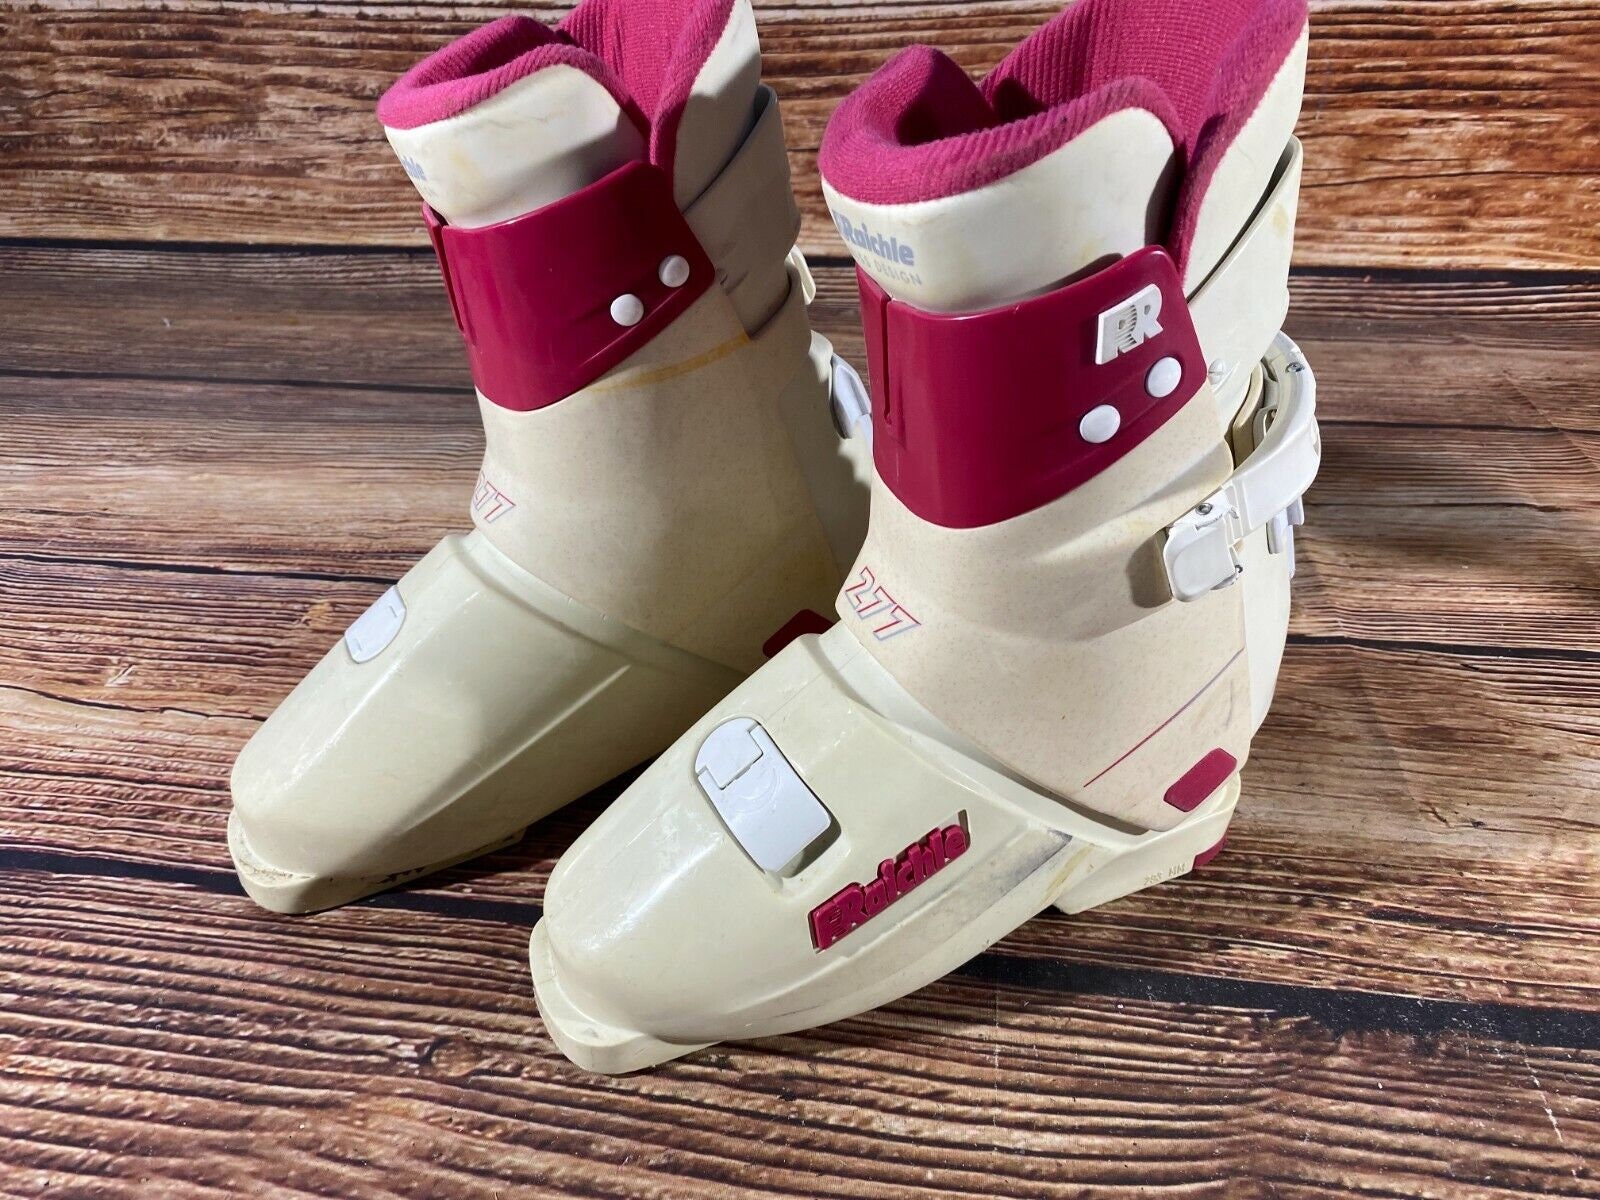 Buy Raichle Vintage Alpine Ski Boots Size Mondo 240 Mm Outer Sole Online in  India - Etsy